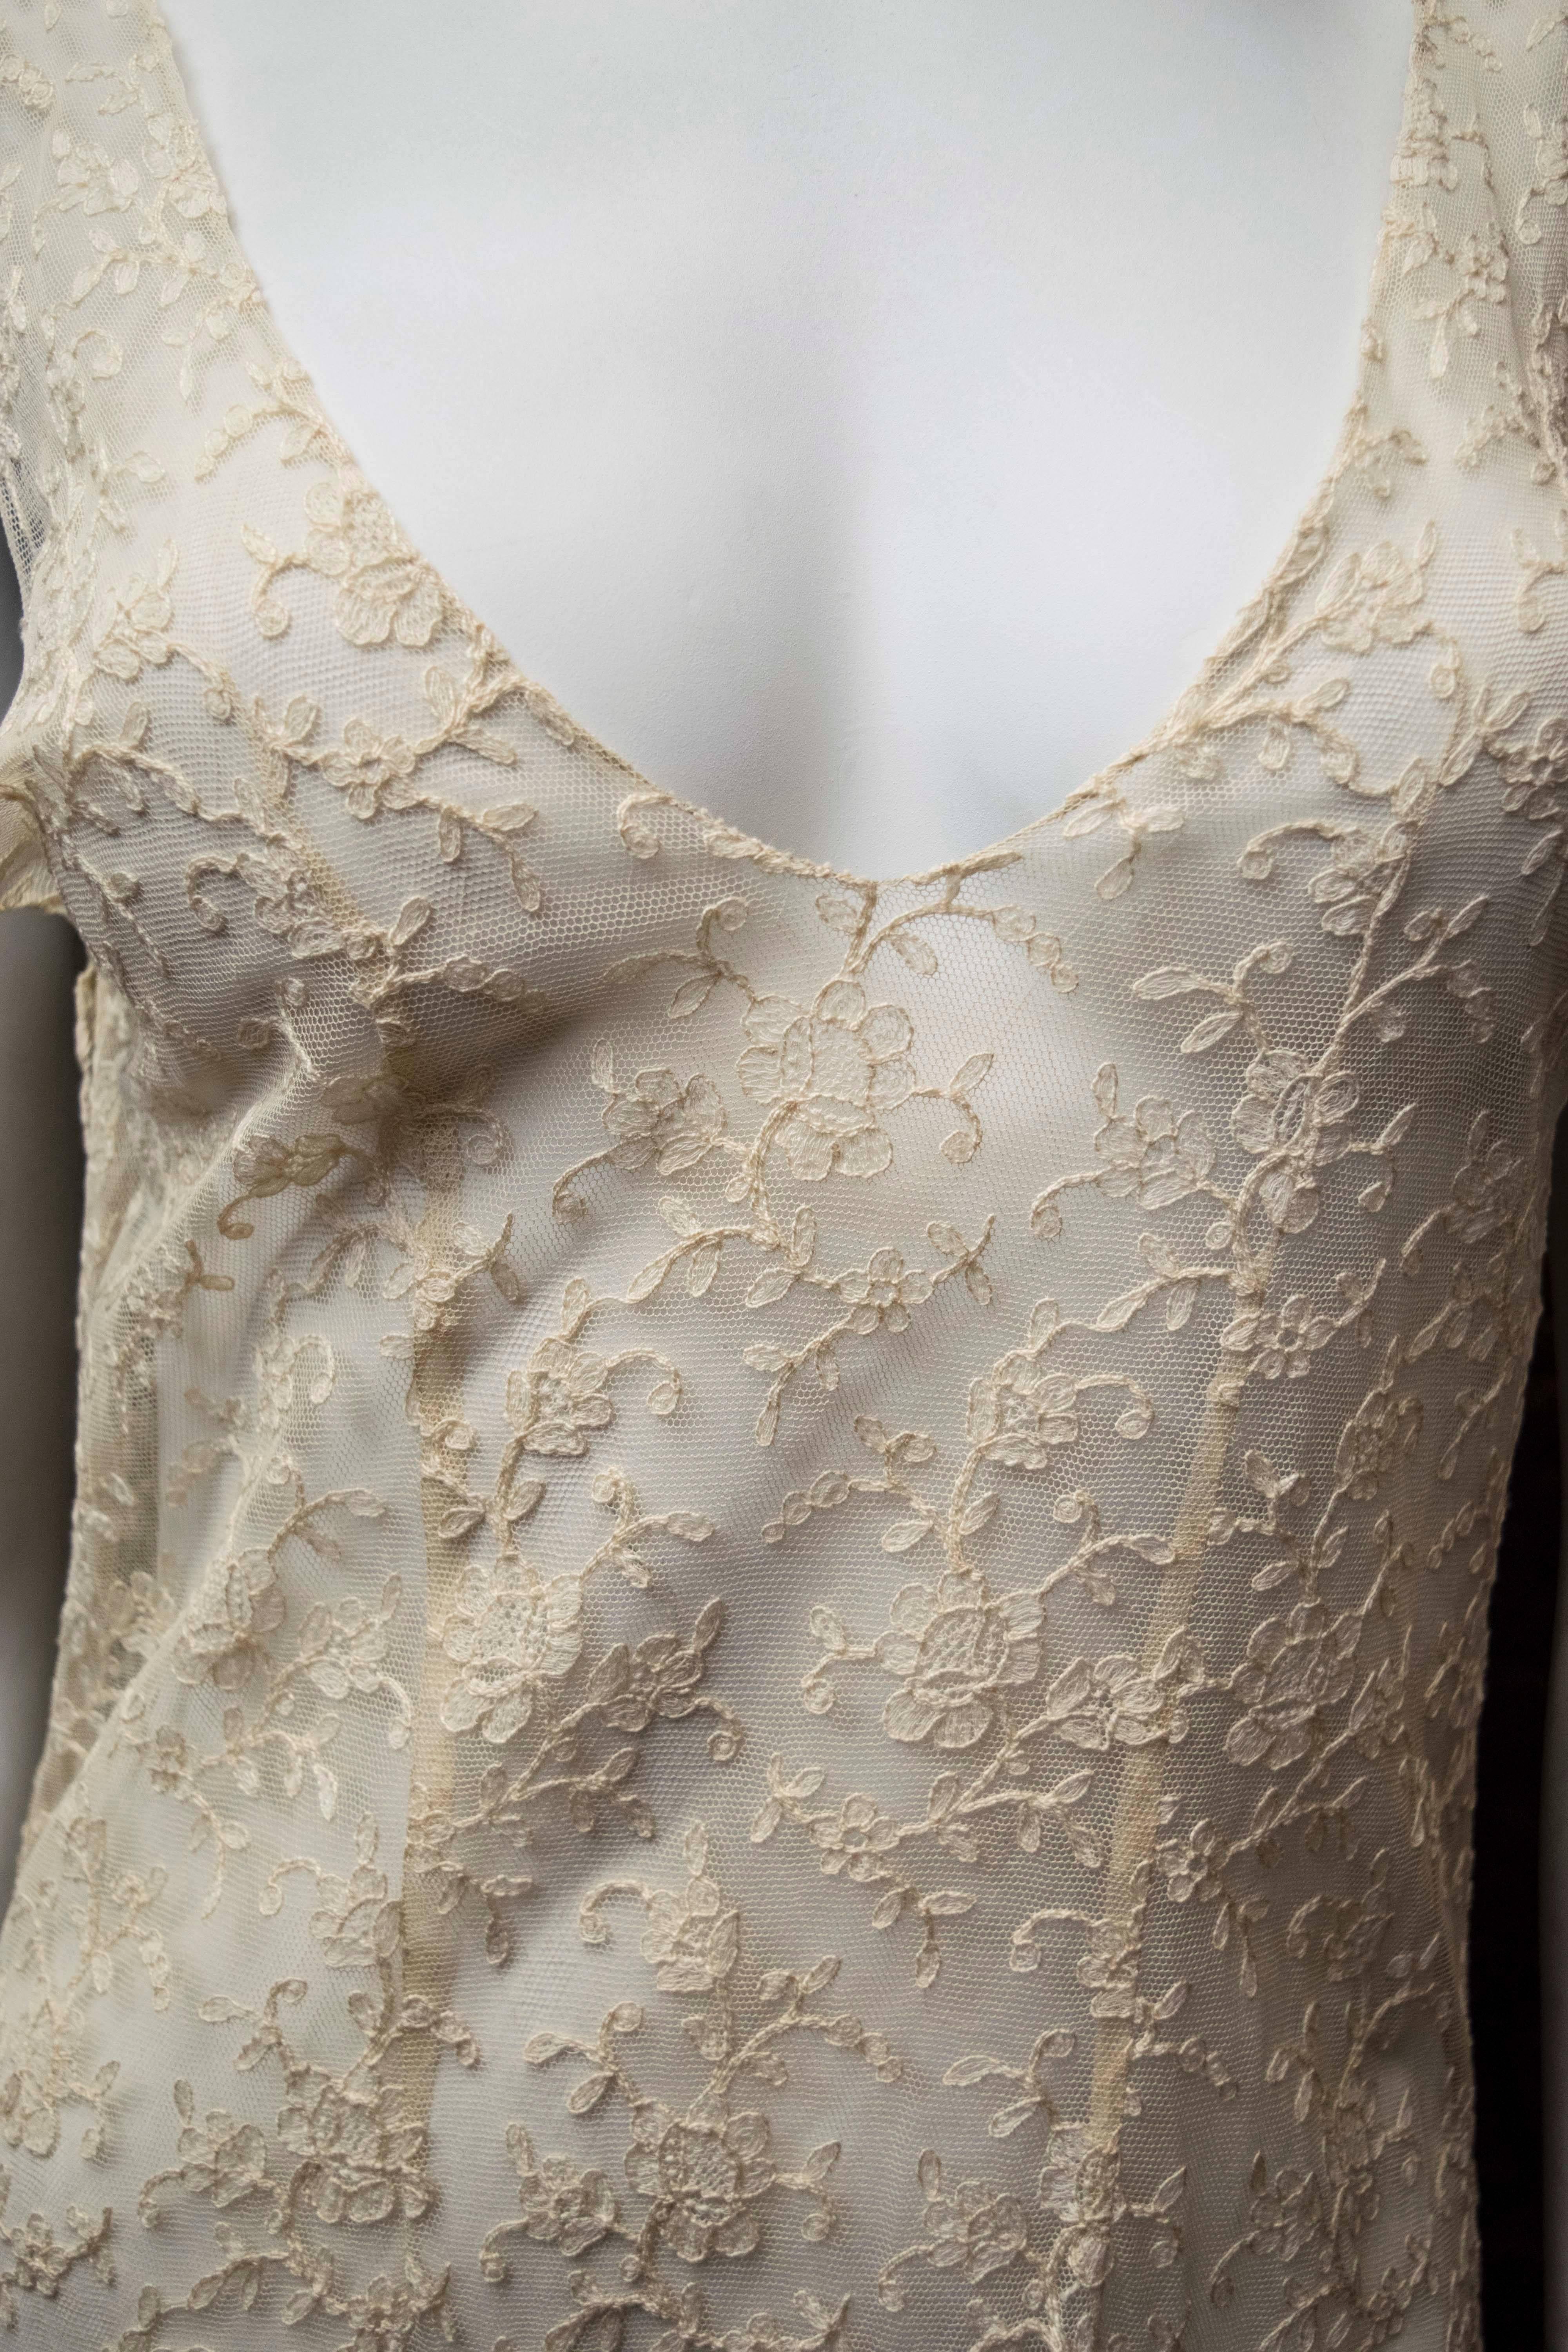 Women's 1930s Embroidered Lace Dress